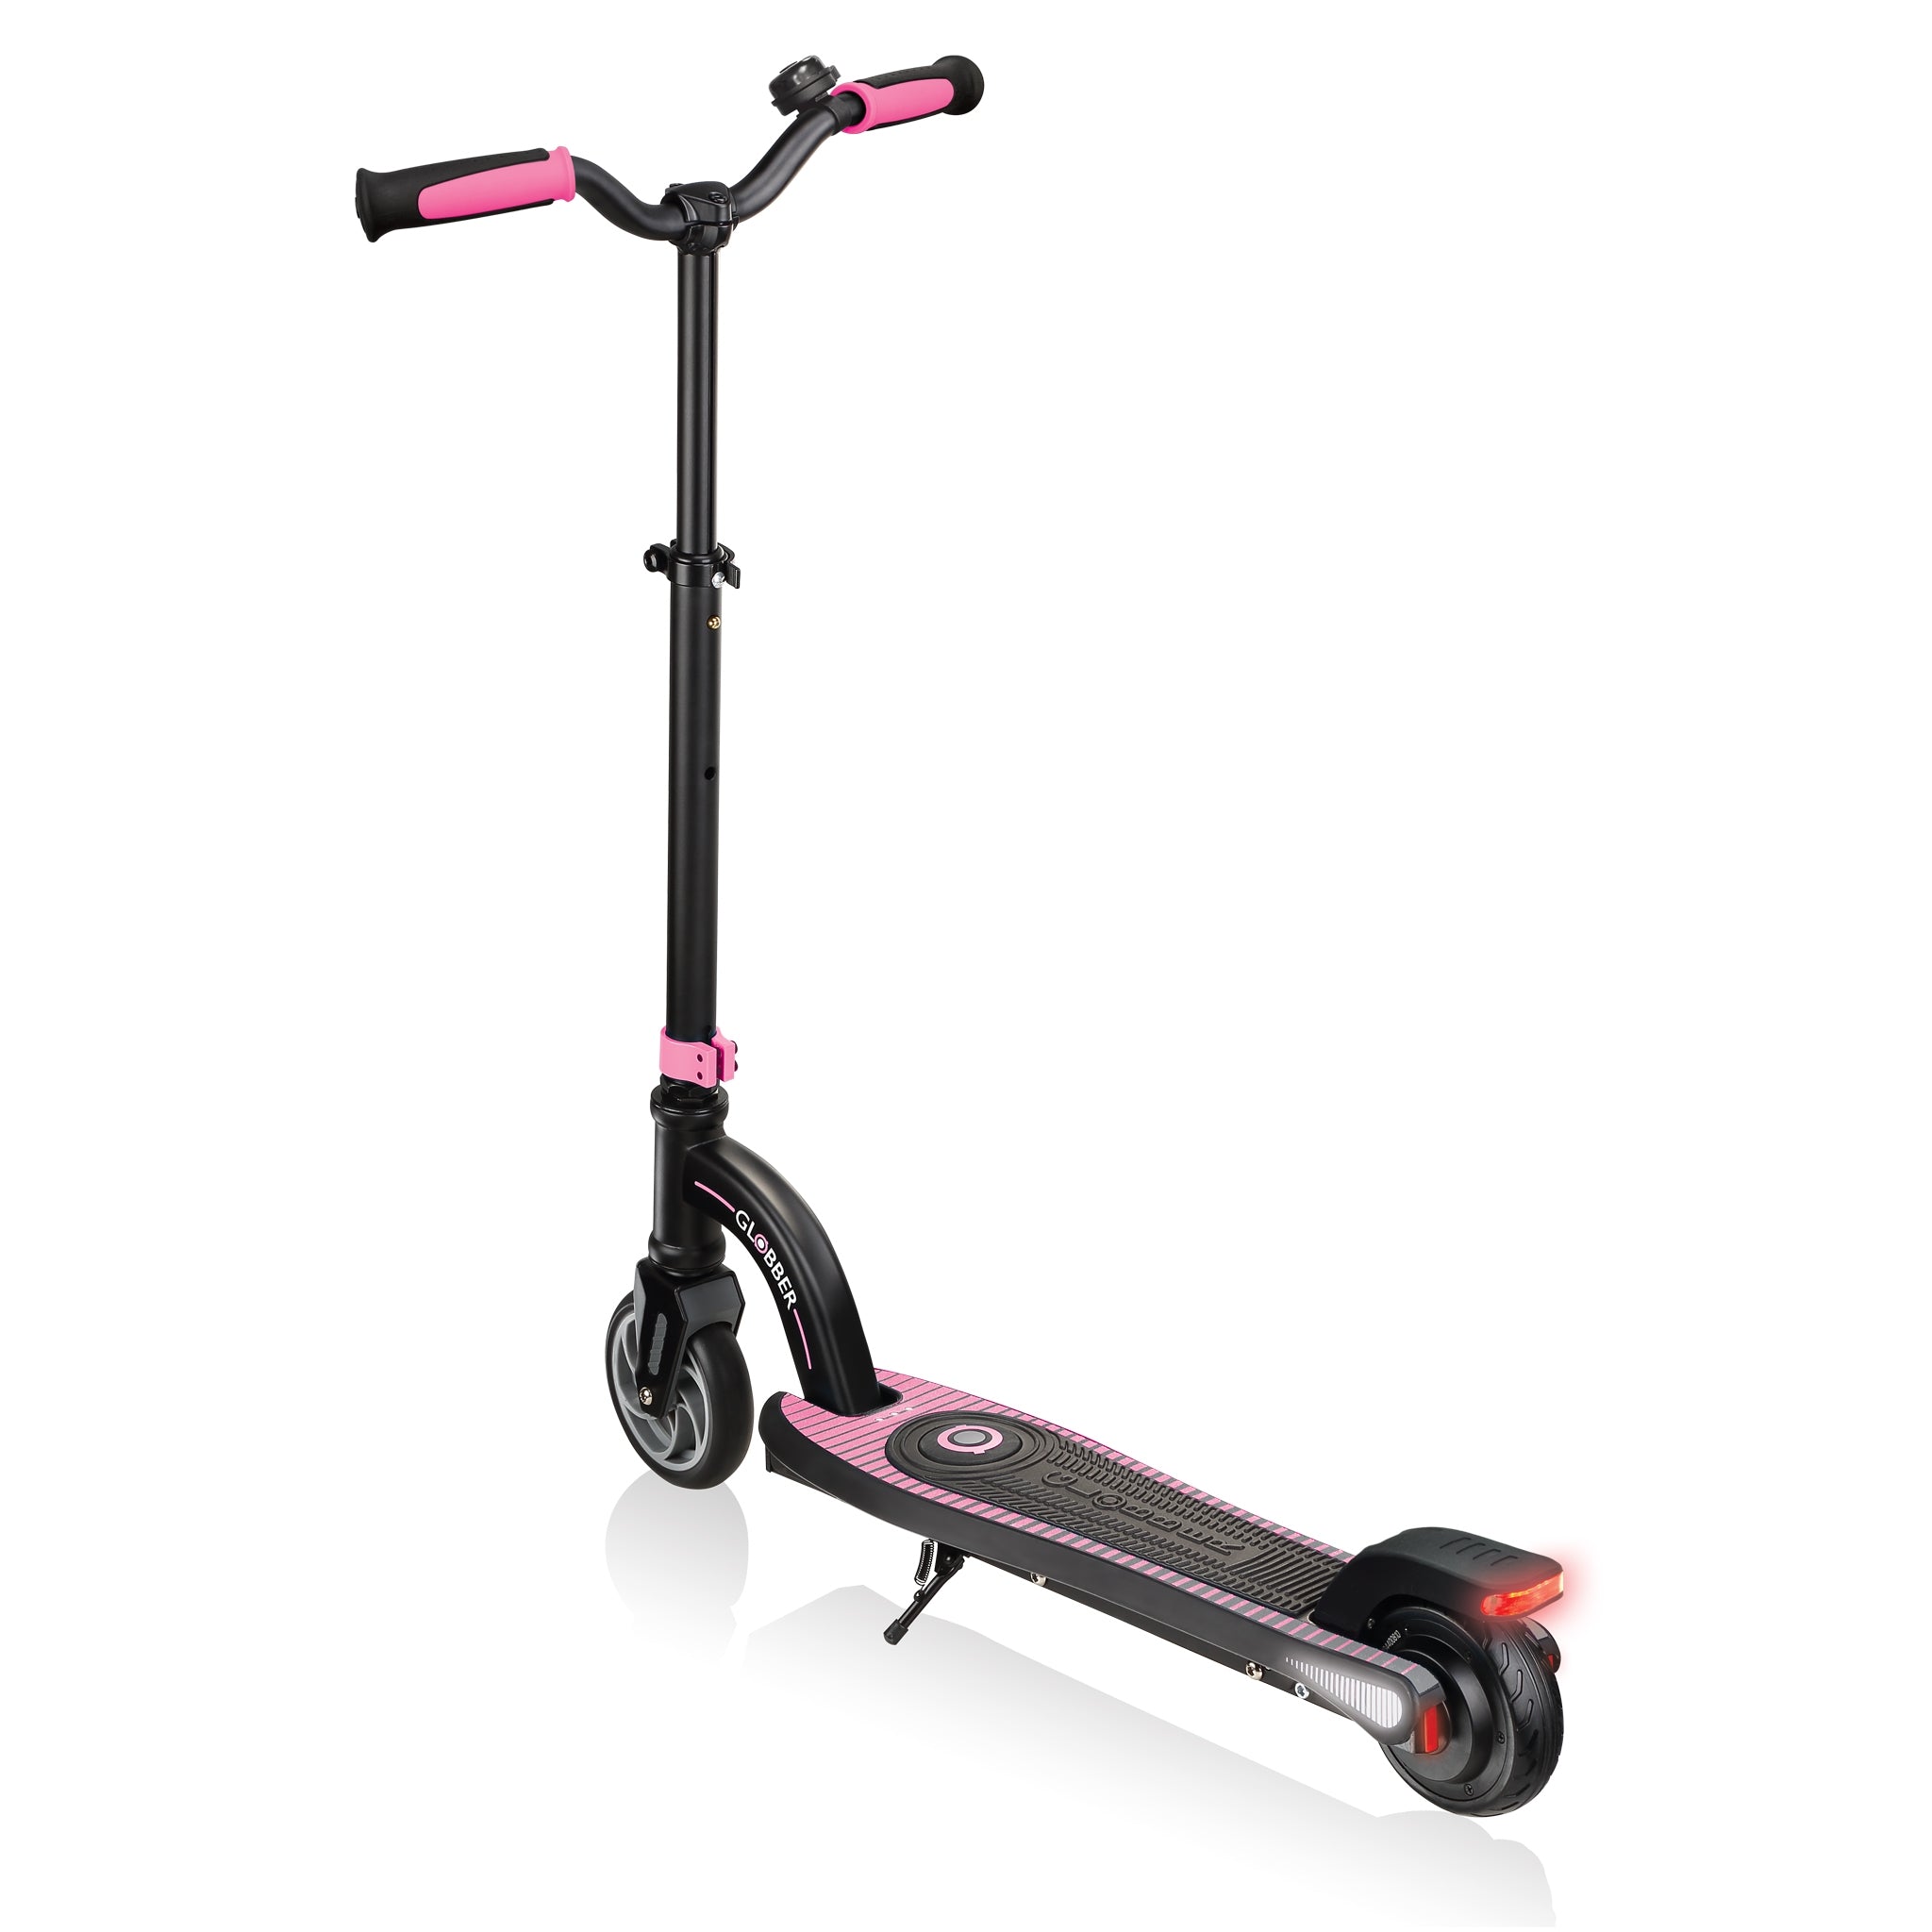 Scooter K E-motional in Pink-Black l Live Ride Laugh